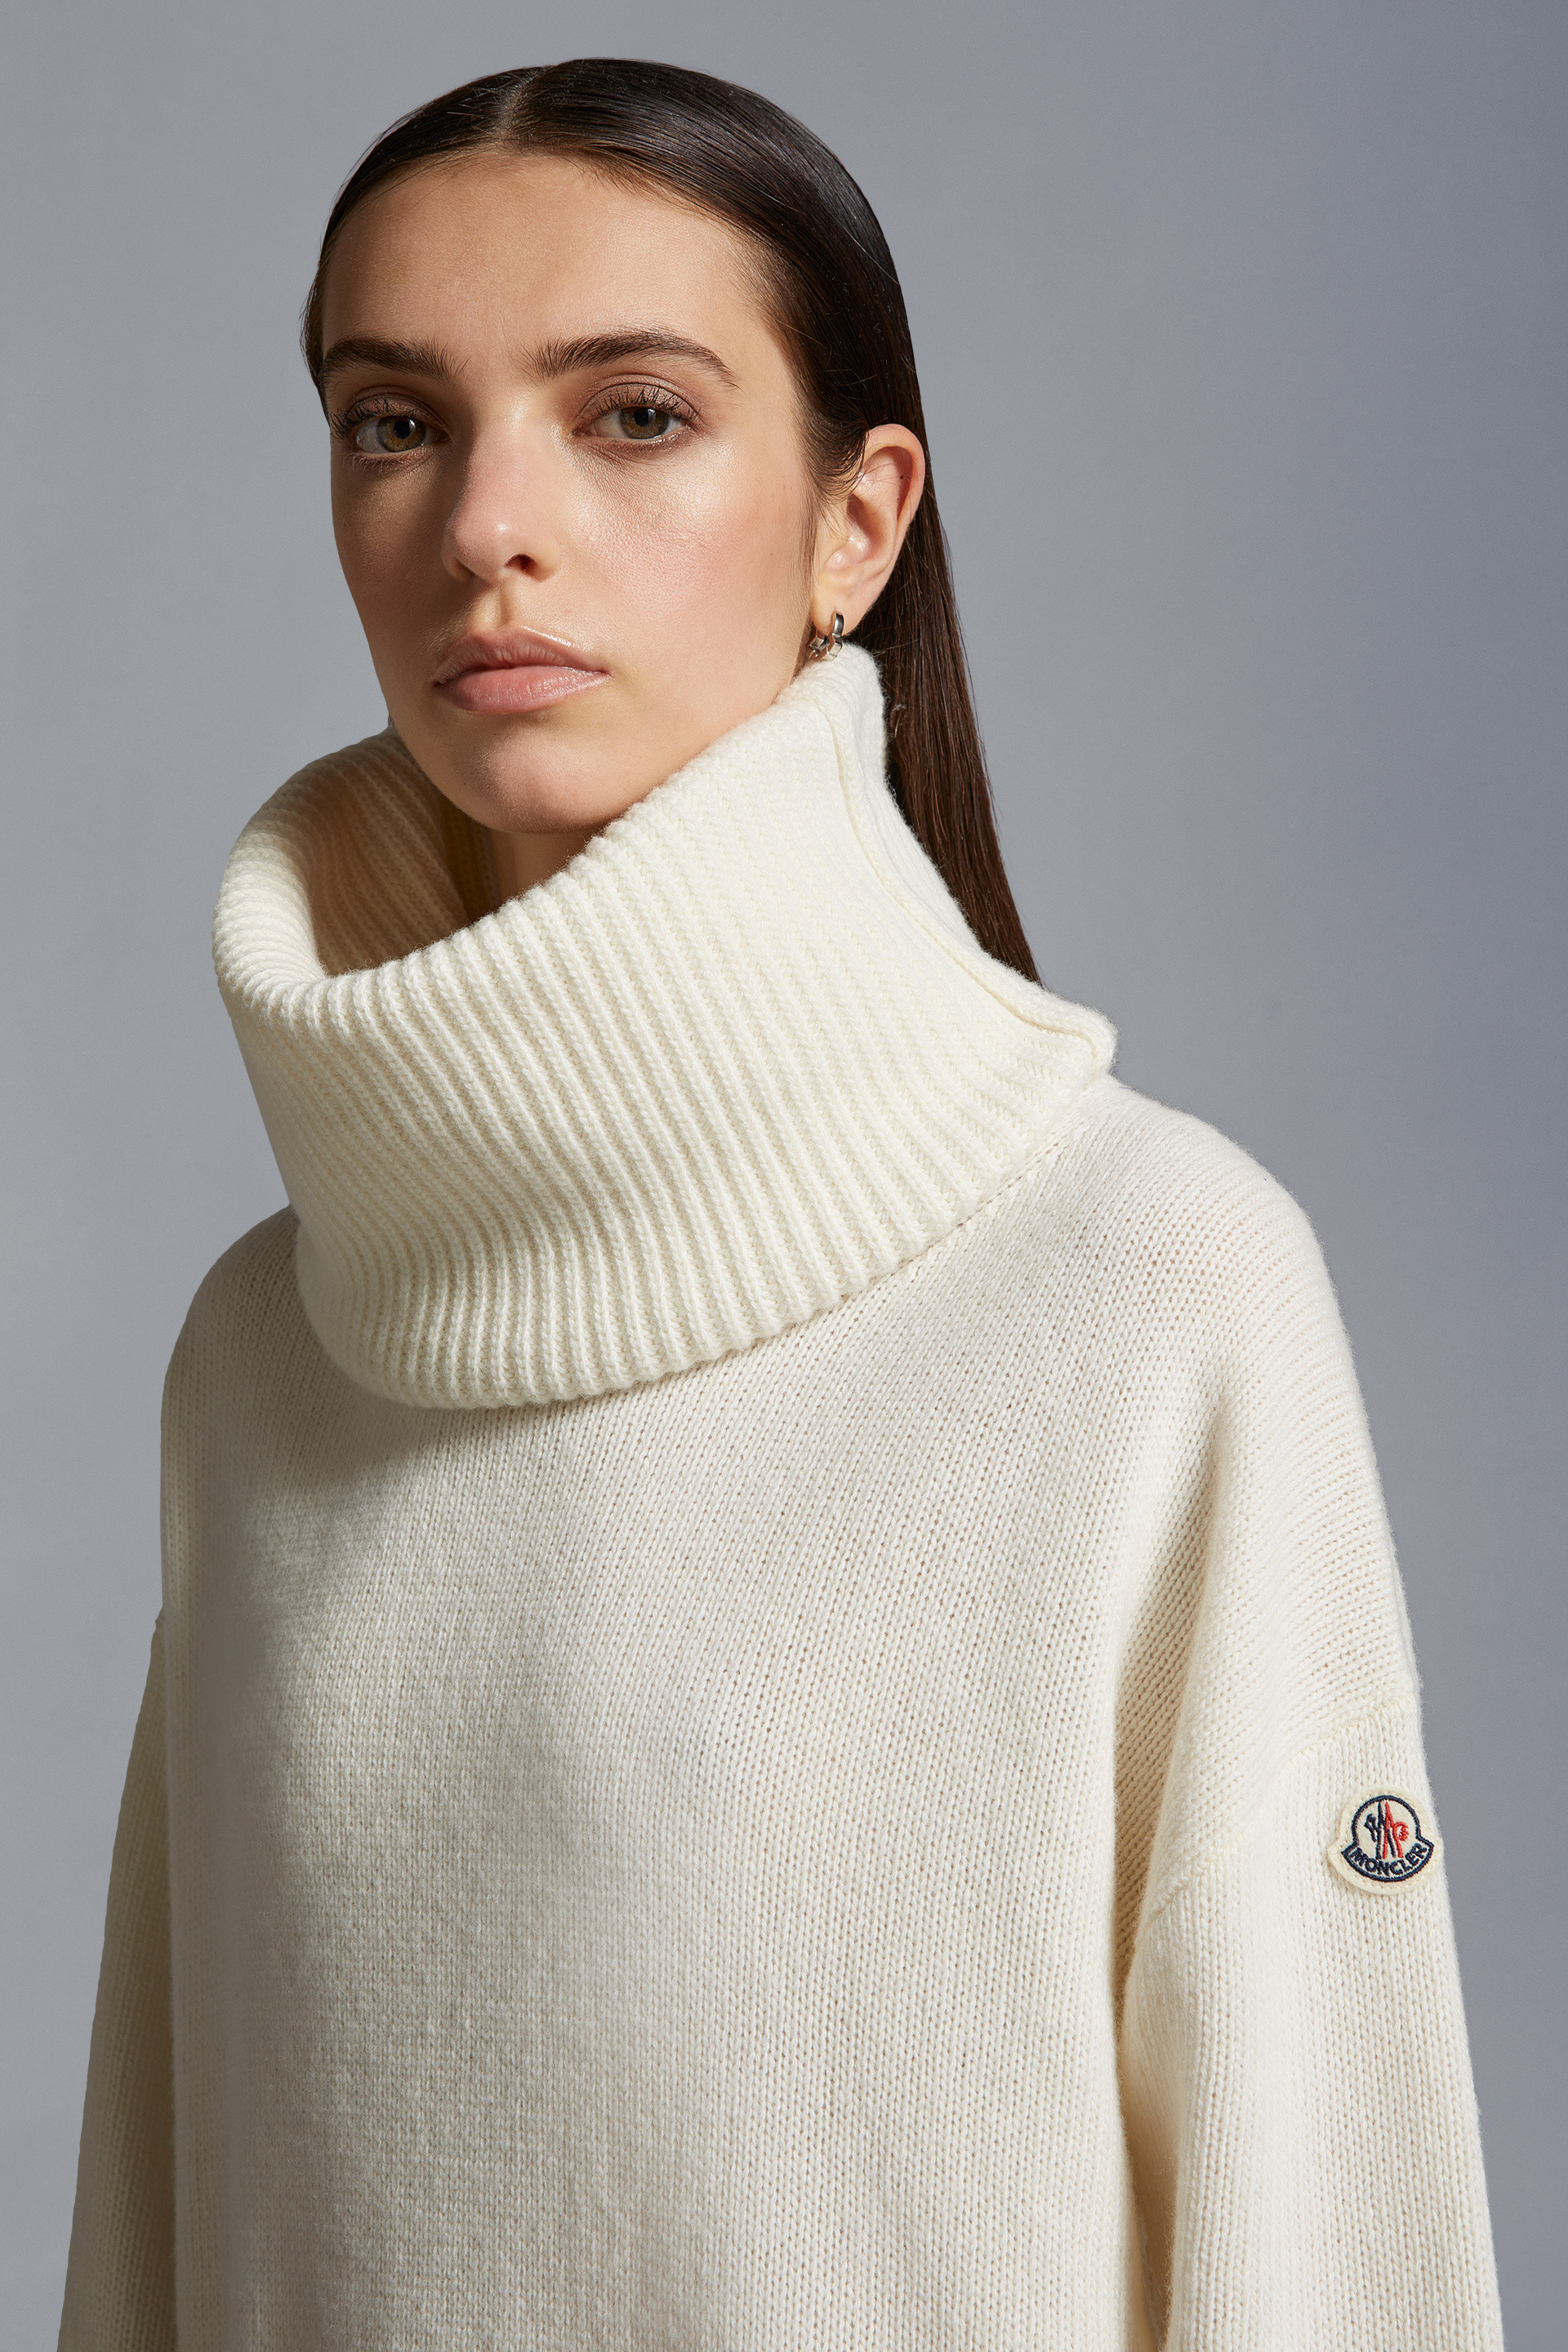 Whyred Icky white merino wool rollneck sweater